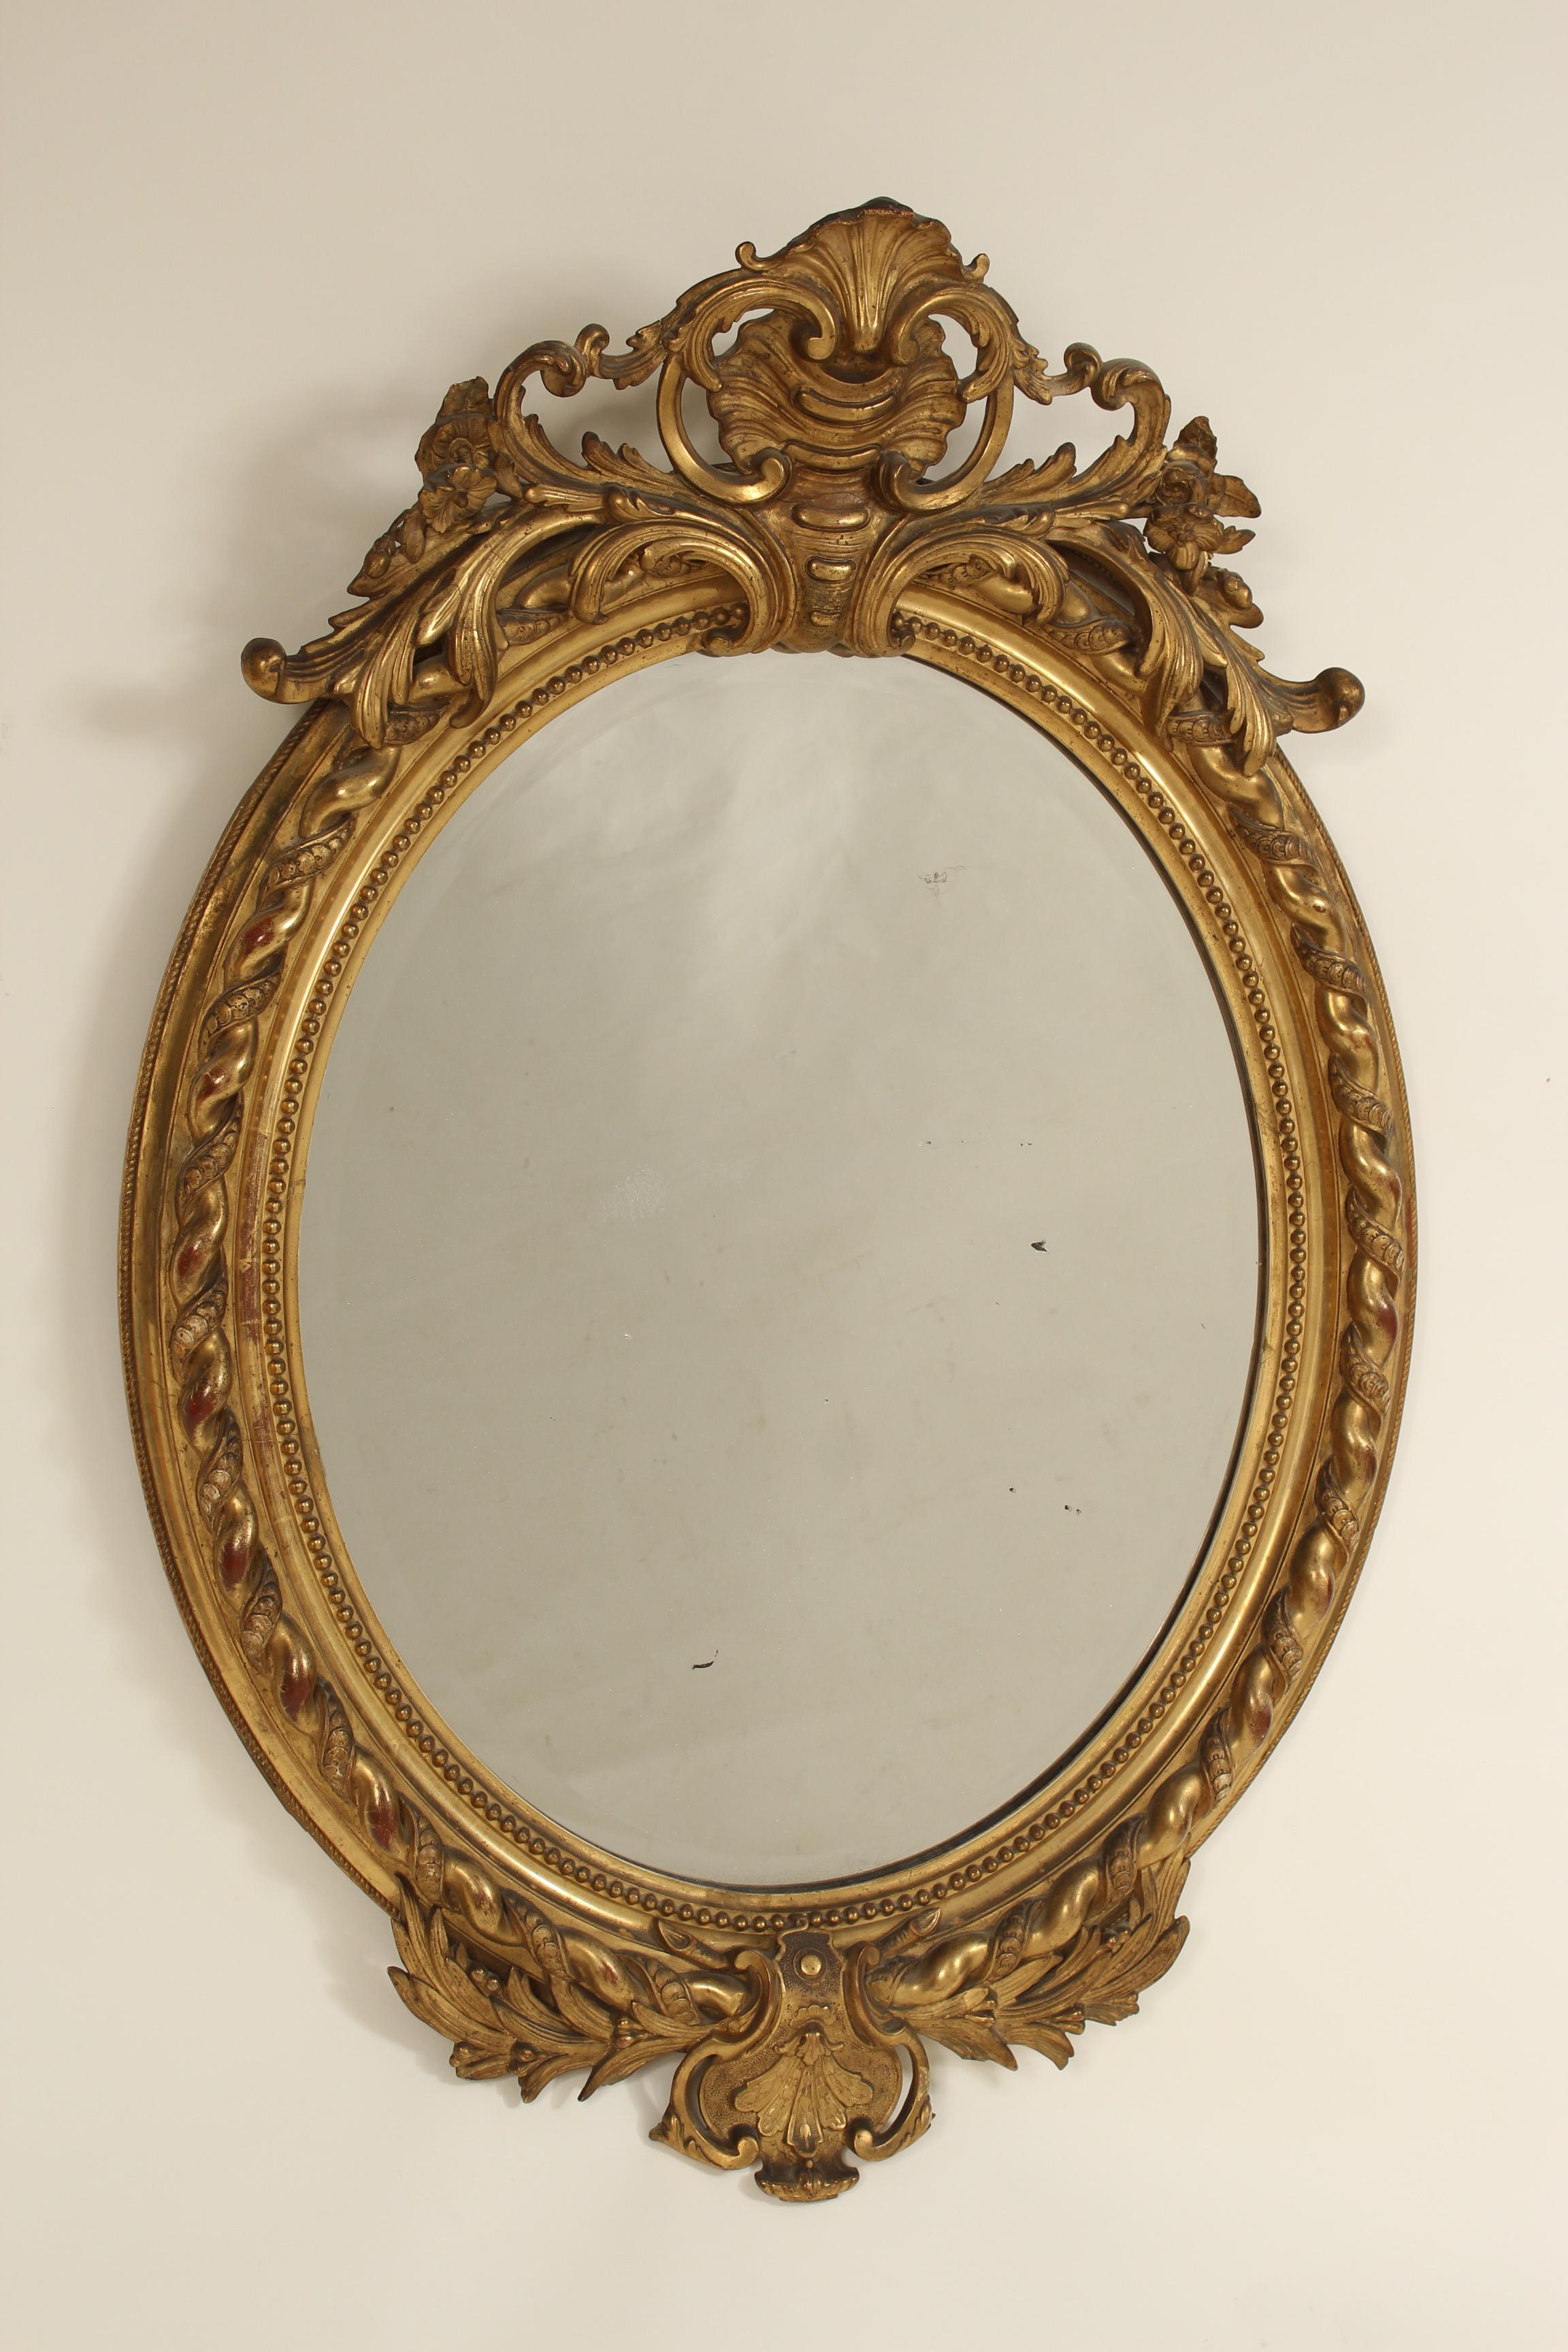 Antique Napoleon III style giltwood and composition mirror, late 19th century. With gold leaf finish and beveled glass.